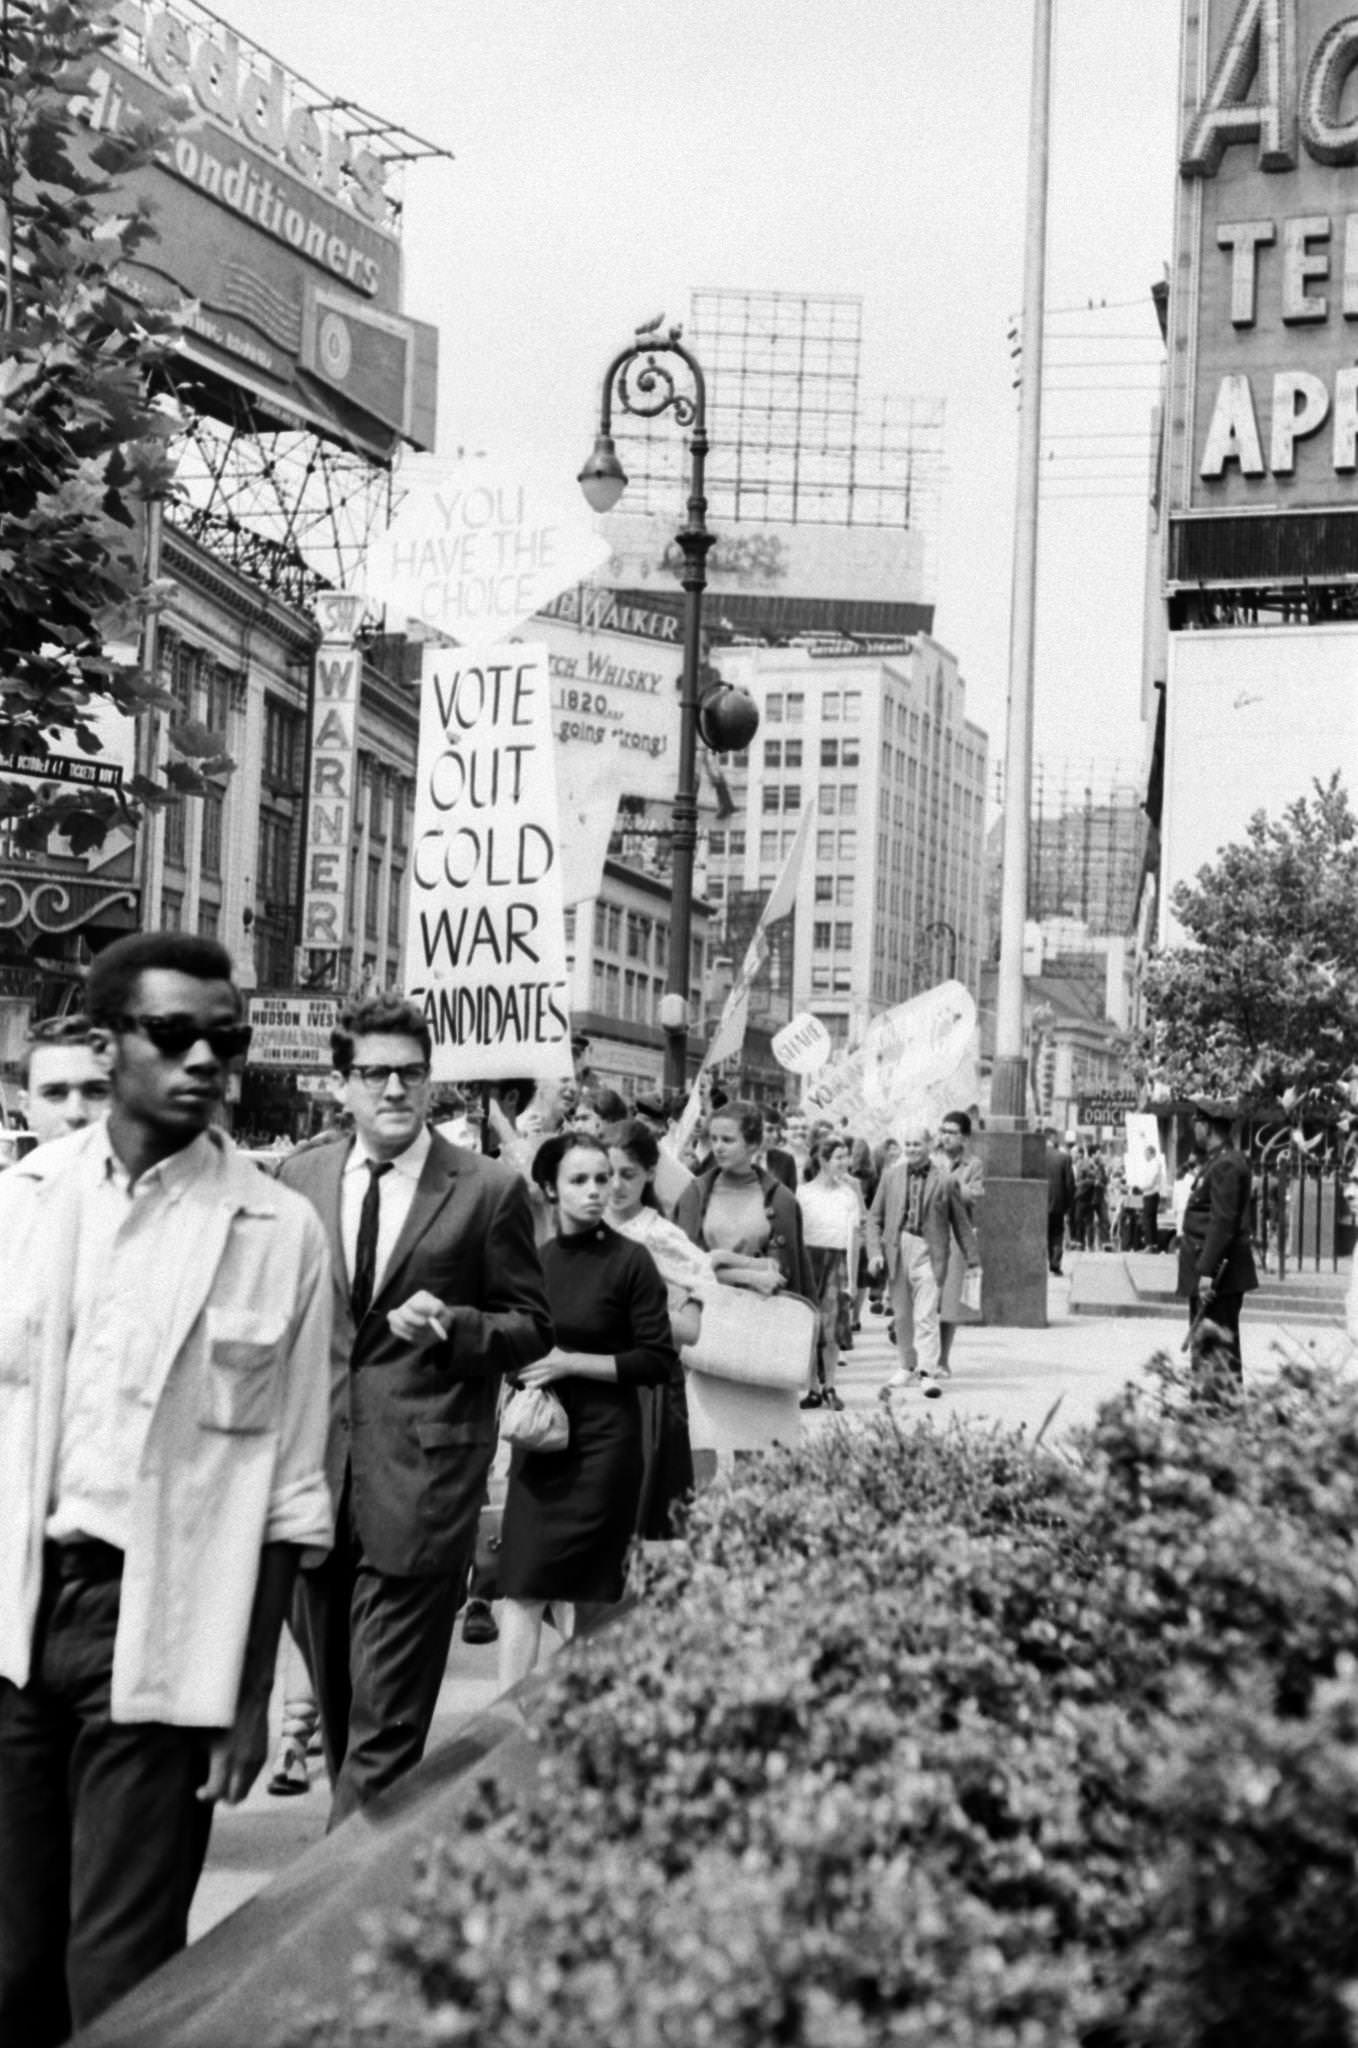 A View Of People Protesting In Times Square Against War And Atom Bomb Testing In The Us And Russia, Manhattan, 1965.